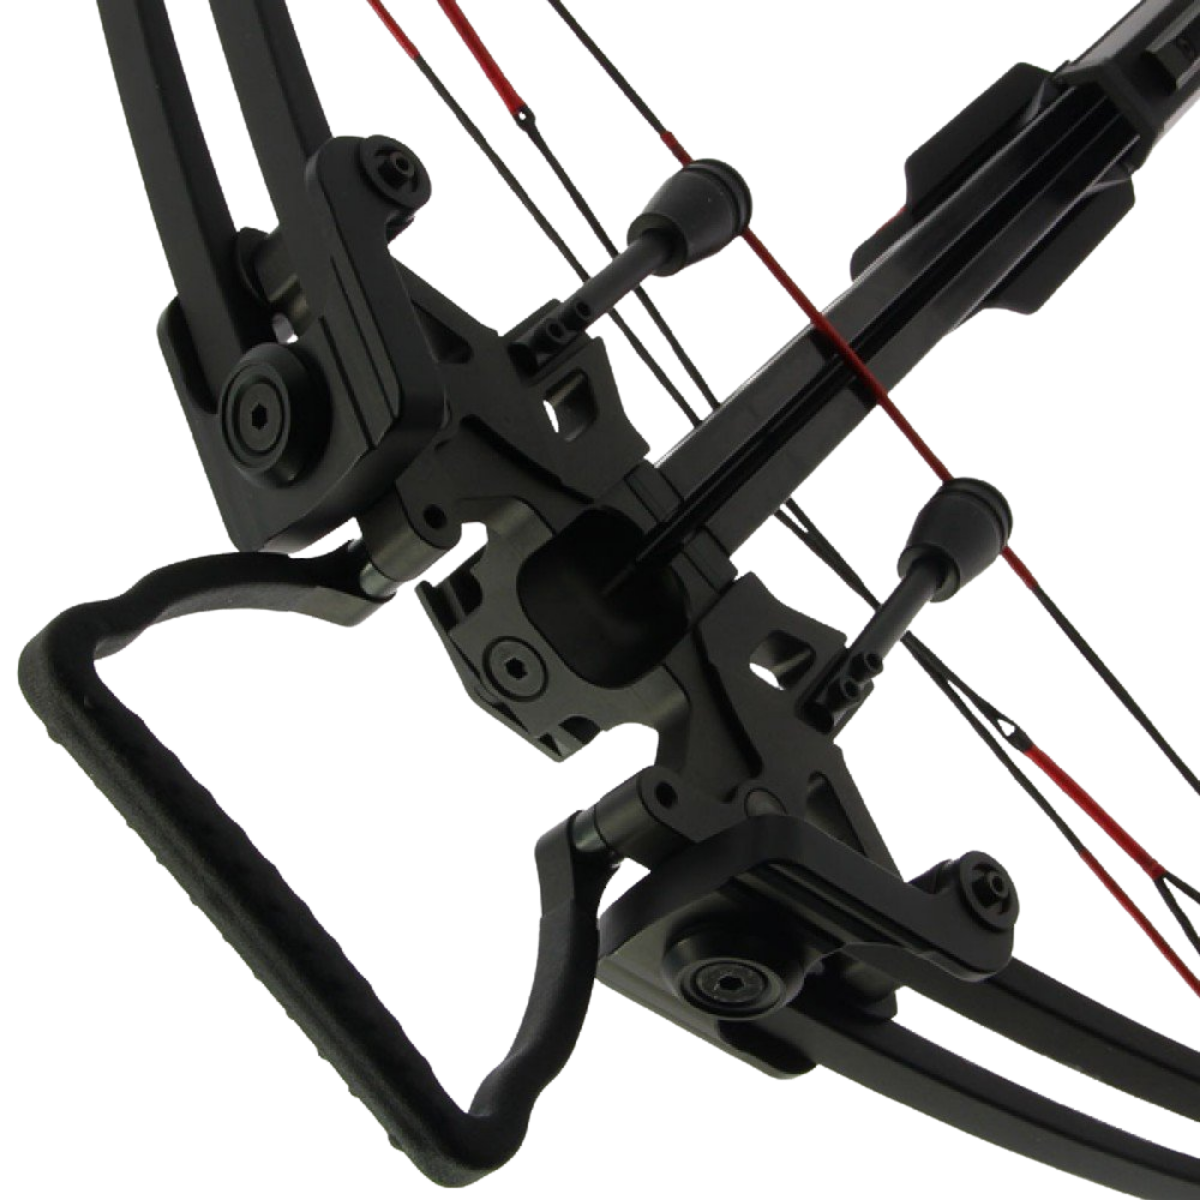 Man Kung MK-400 Ares Compound Crossbow Package 360fps - Fast UK Shipping | Tactical Archery UK